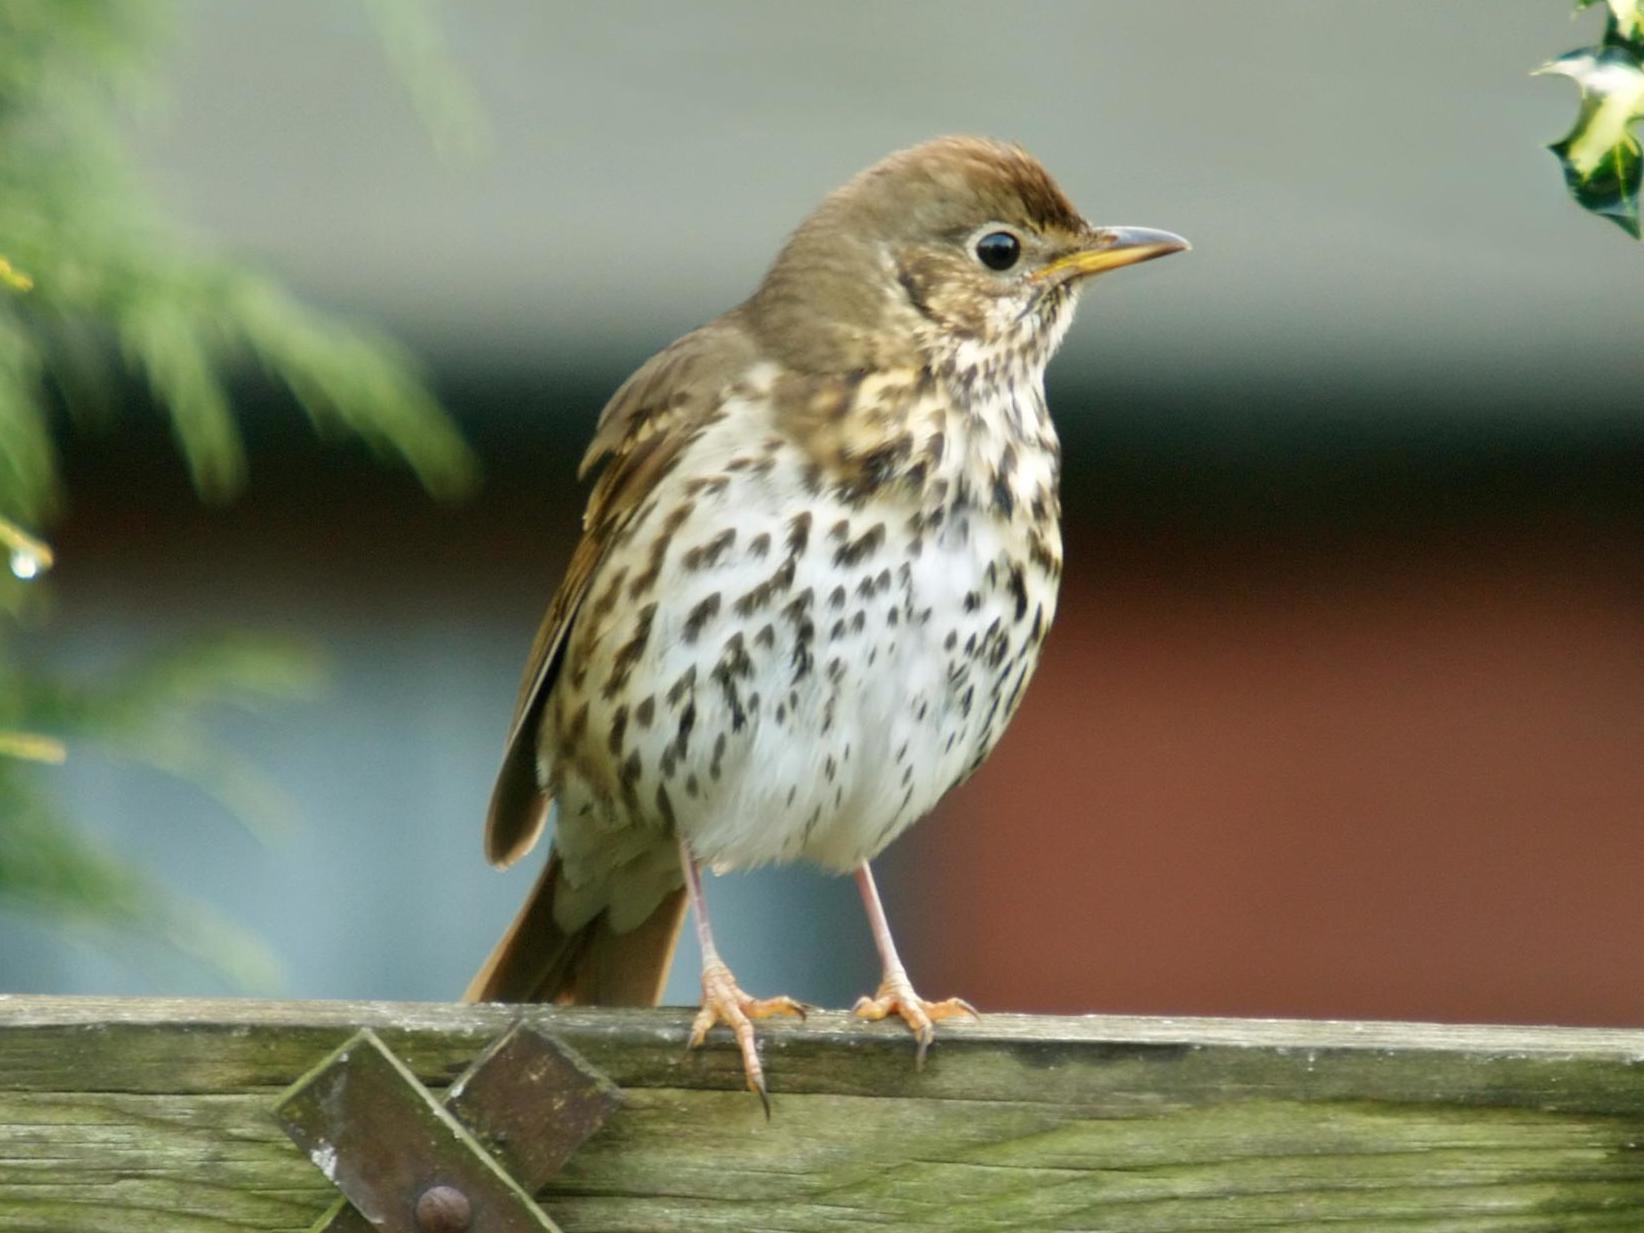 Hunters target thrushes and other songbirds with the controversial traps